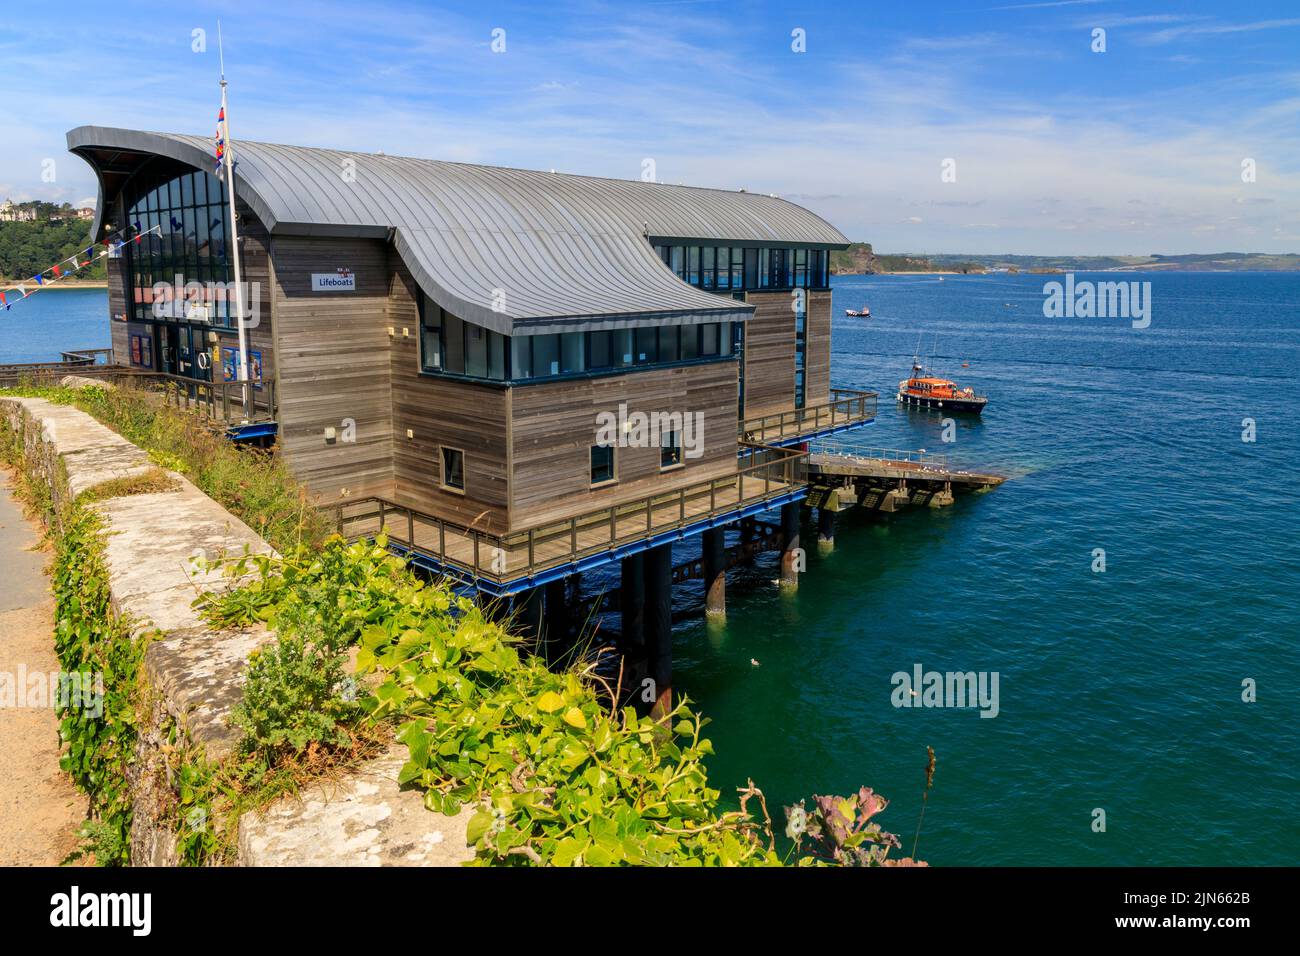 The new RNLI lifeboat station in Tenby, Pembrokeshire, Wales, UK Stock Photo